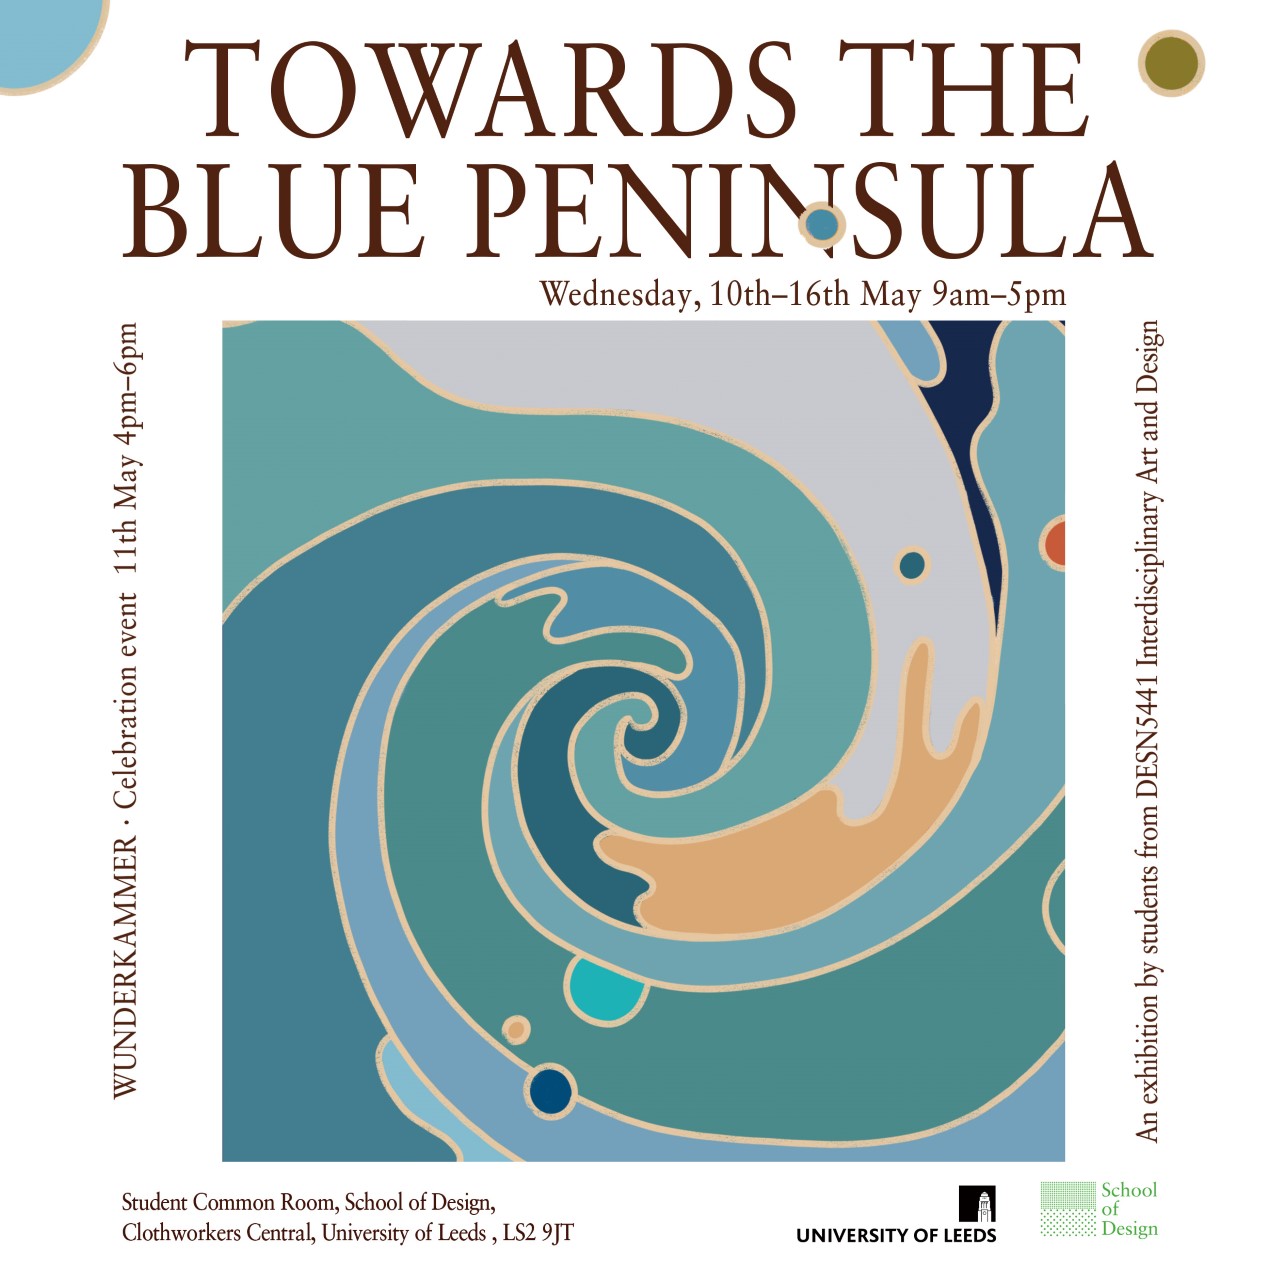 Towards the Blue Peninsula - Information poster